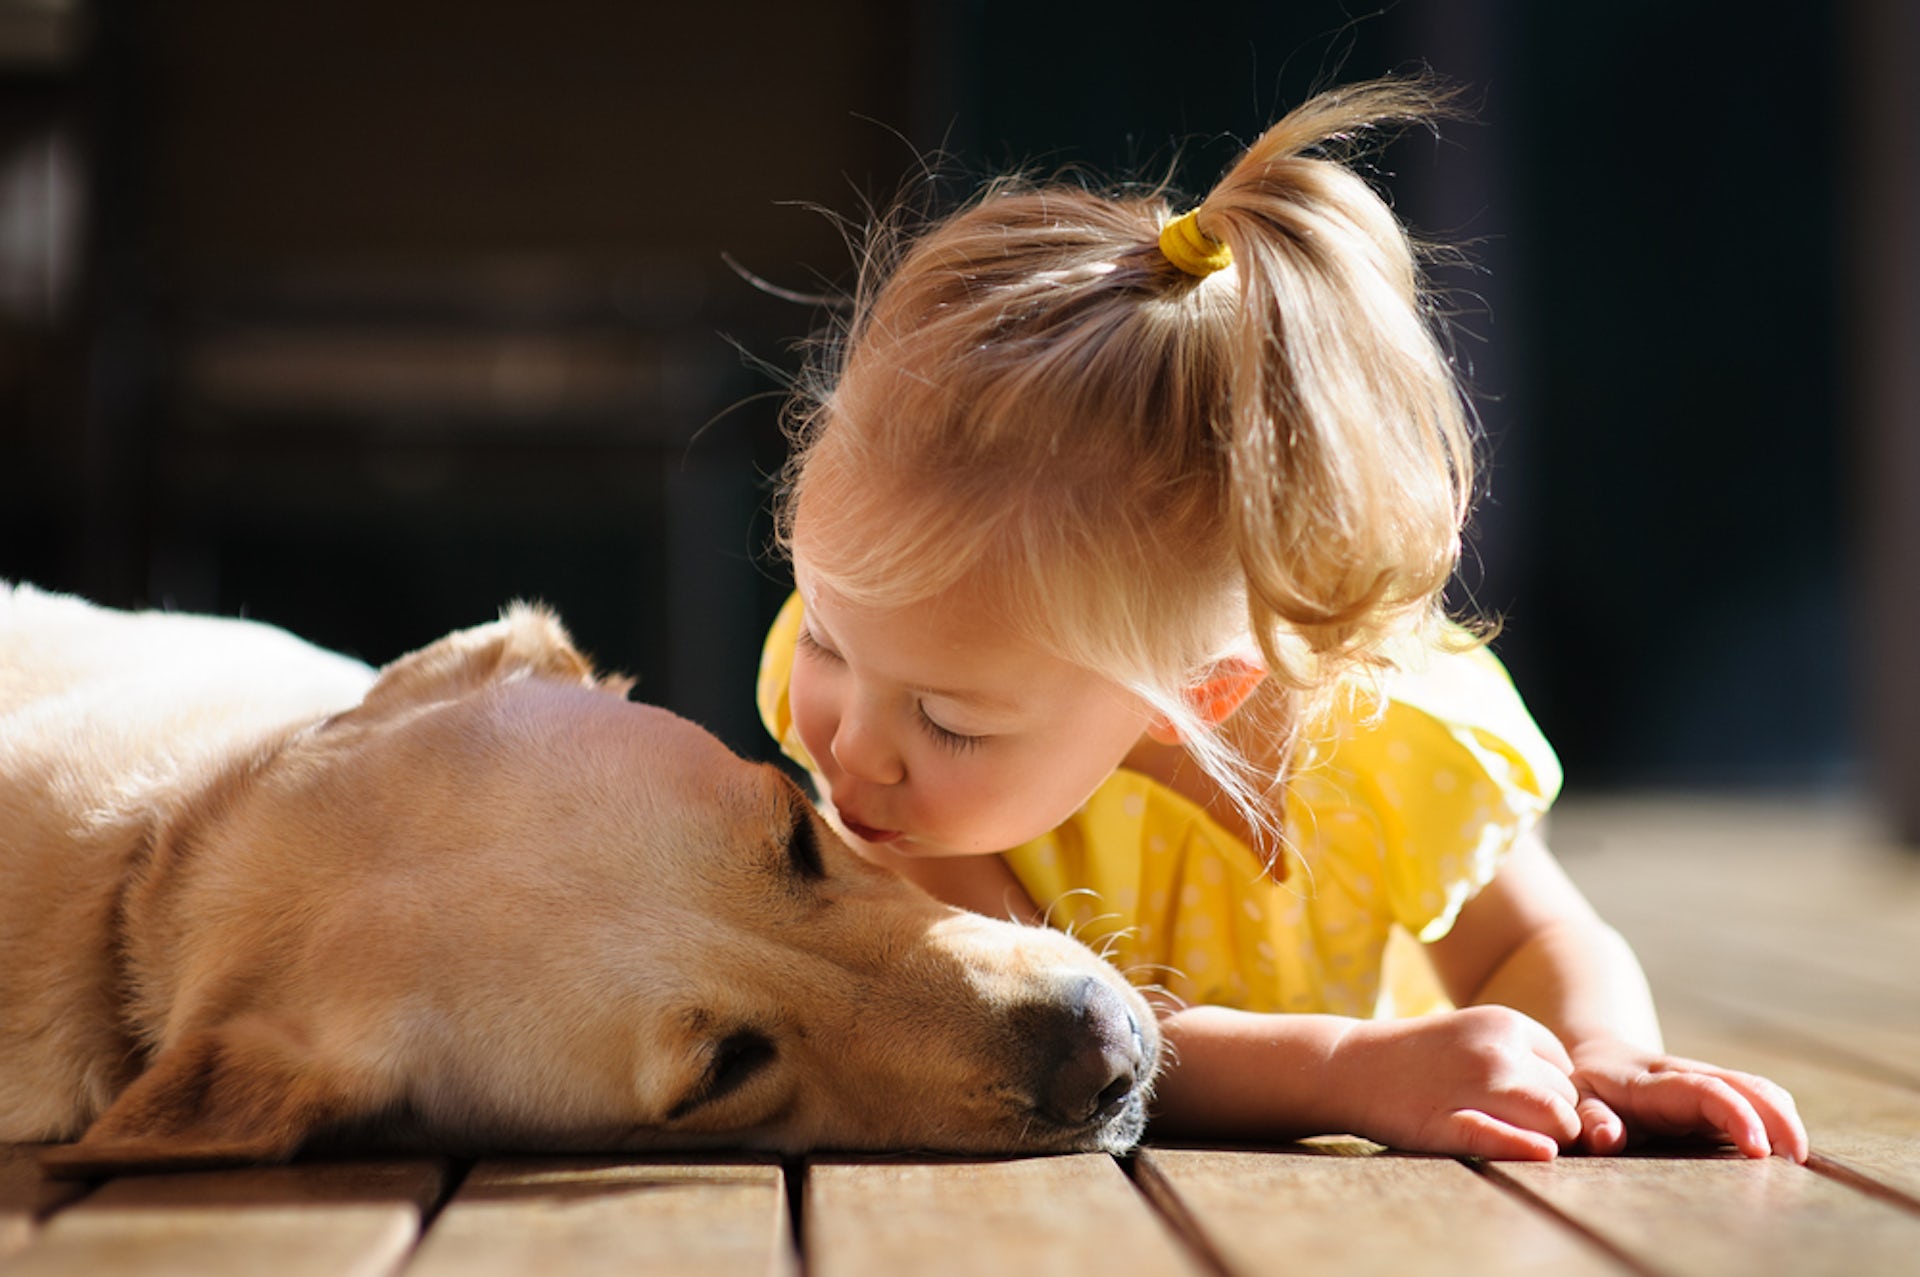 Can young children easily confuse dog emotions? Research suggests so.